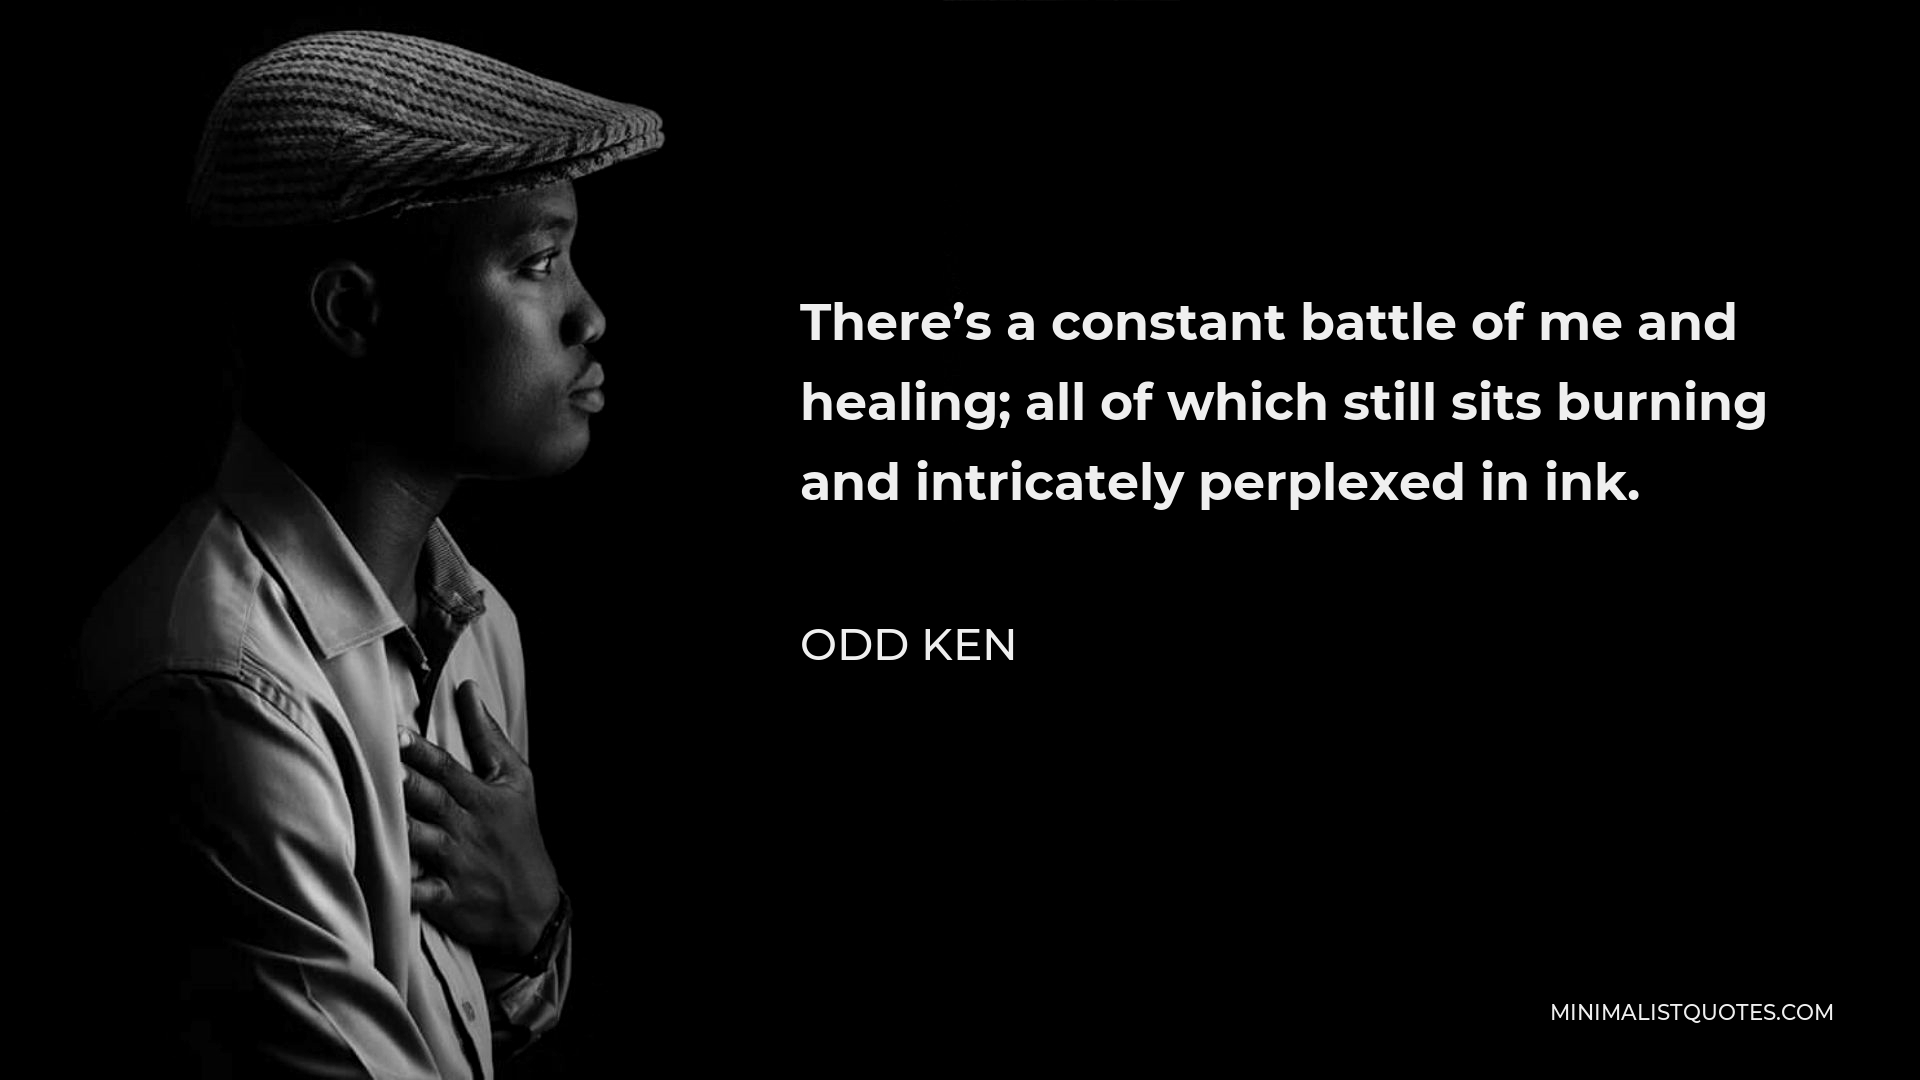 Odd Ken Quote - There’s a constant battle of me and healing; all of which still sits burning and intricately perplexed in ink.